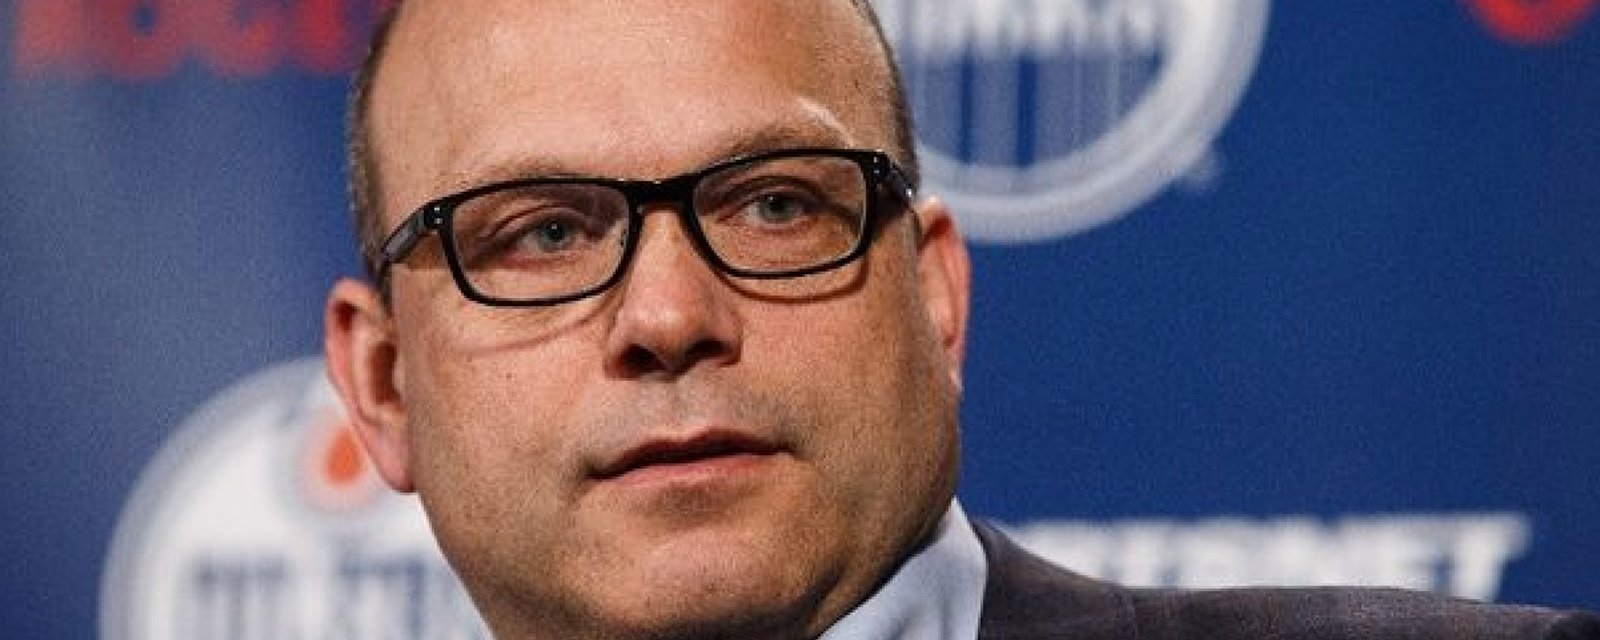 Oilers' GM sees young player as possible deadline addition.